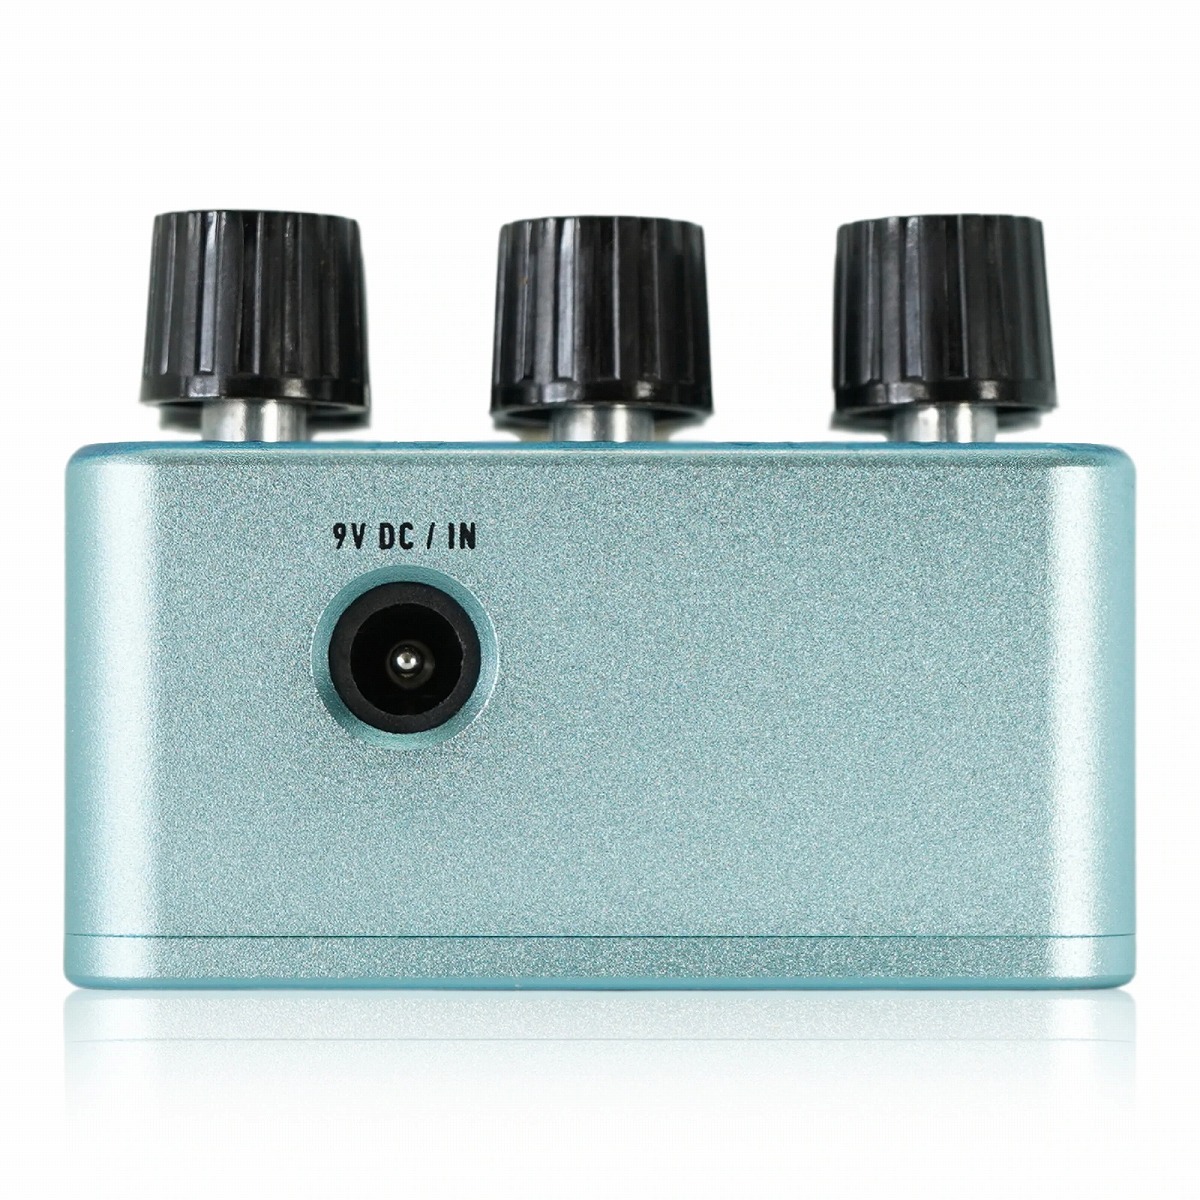 One Control Pale Blue Compressor コンプレッサー ワンコントロール イシバシ楽器